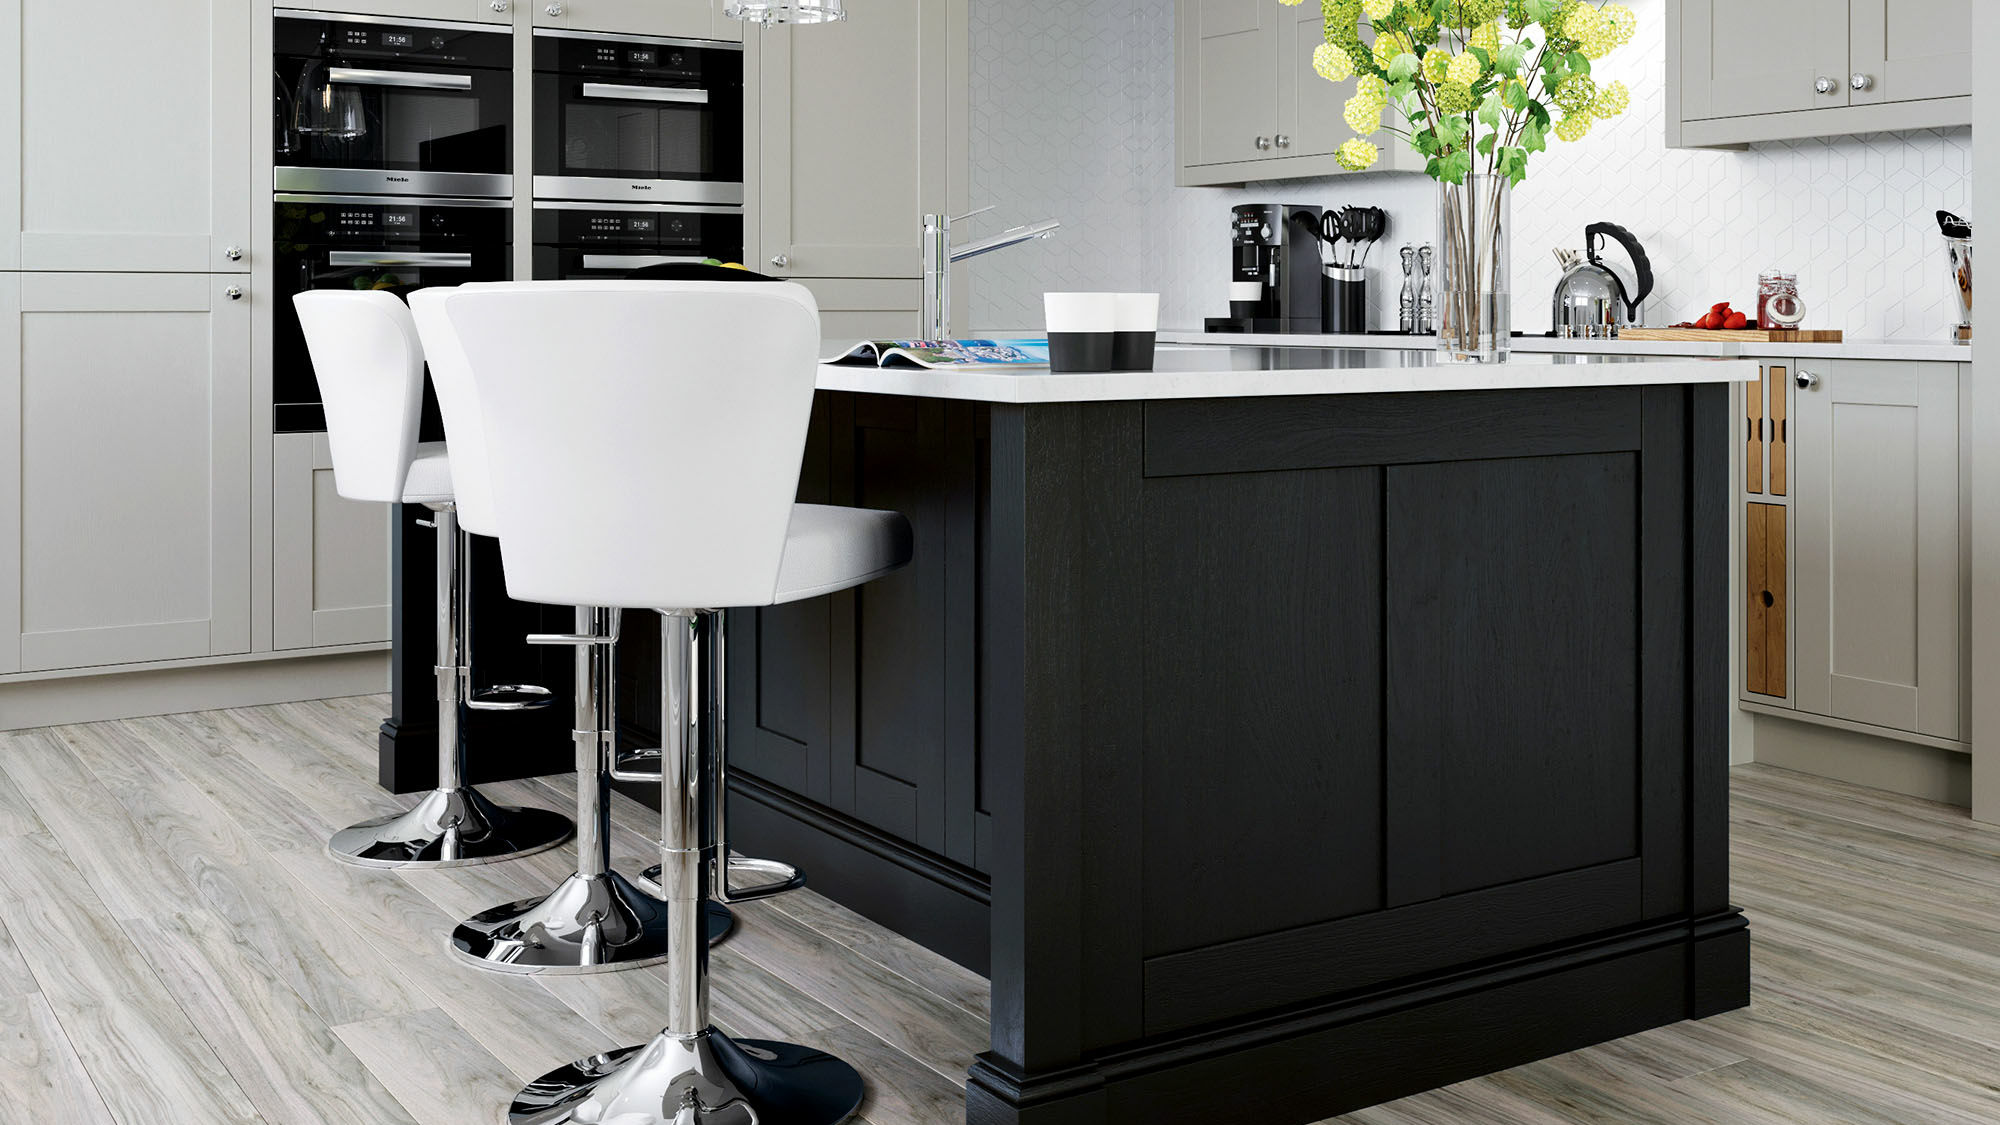 Madison solid wood Cannon Black kitchens offering sturdy construction with a classic, elegant black aesthetic